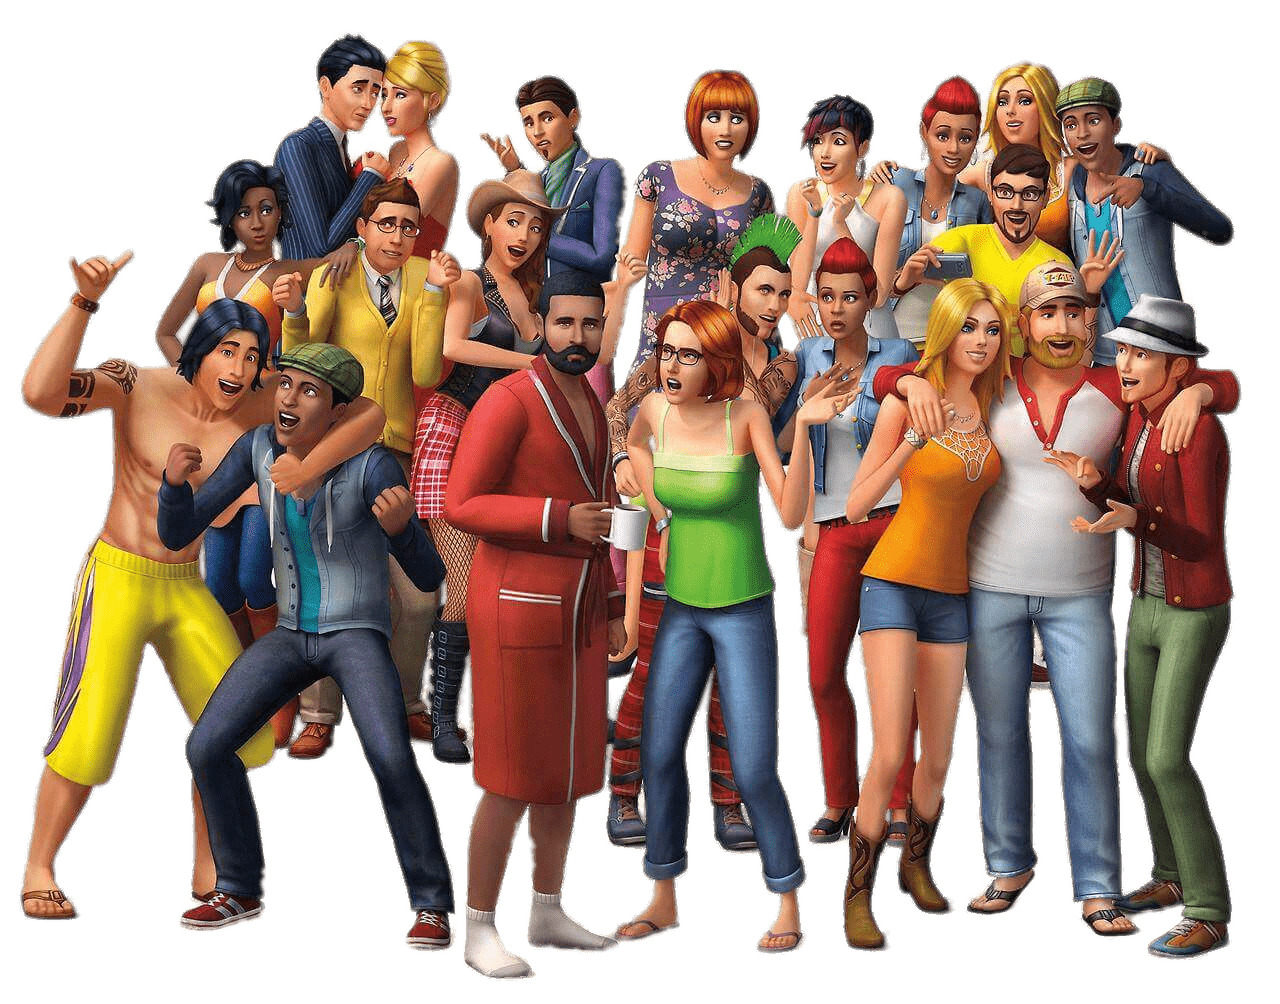 The Sims Characters png icons